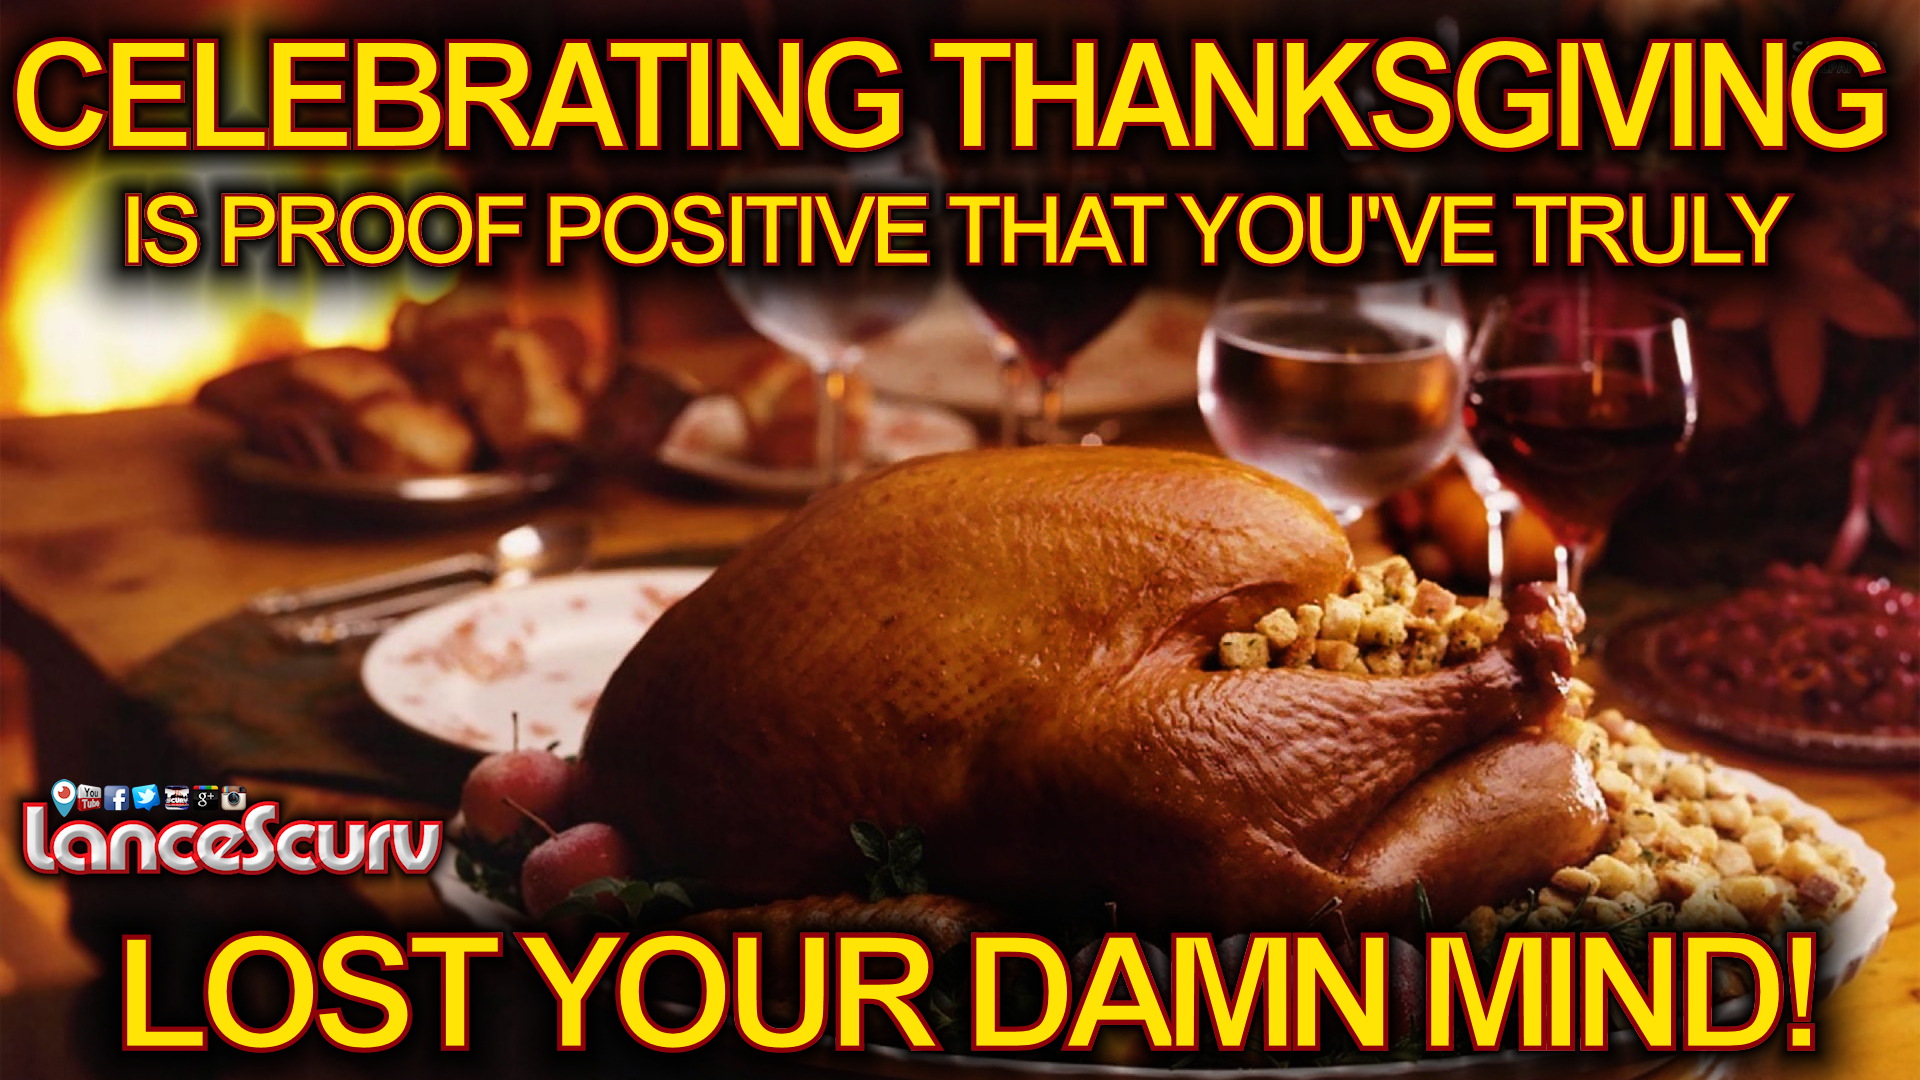 Celebrating Thanksgiving Is Proof Positive That You've Truly Lost Your Damn Mind! - LanceScurv